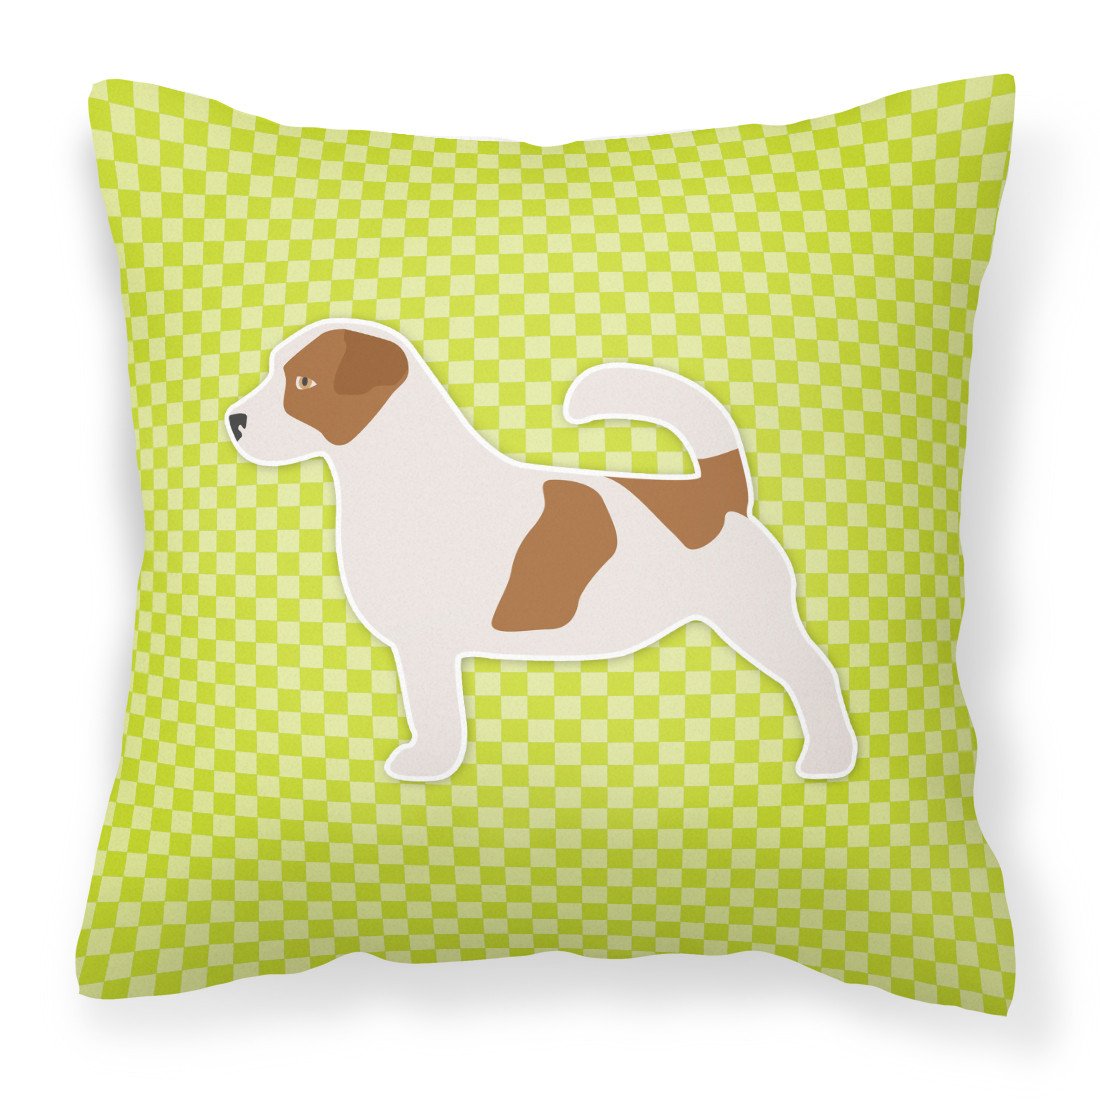 Jack Russell Terrier Checkerboard Green Fabric Decorative Pillow BB3807PW1818 by Caroline's Treasures